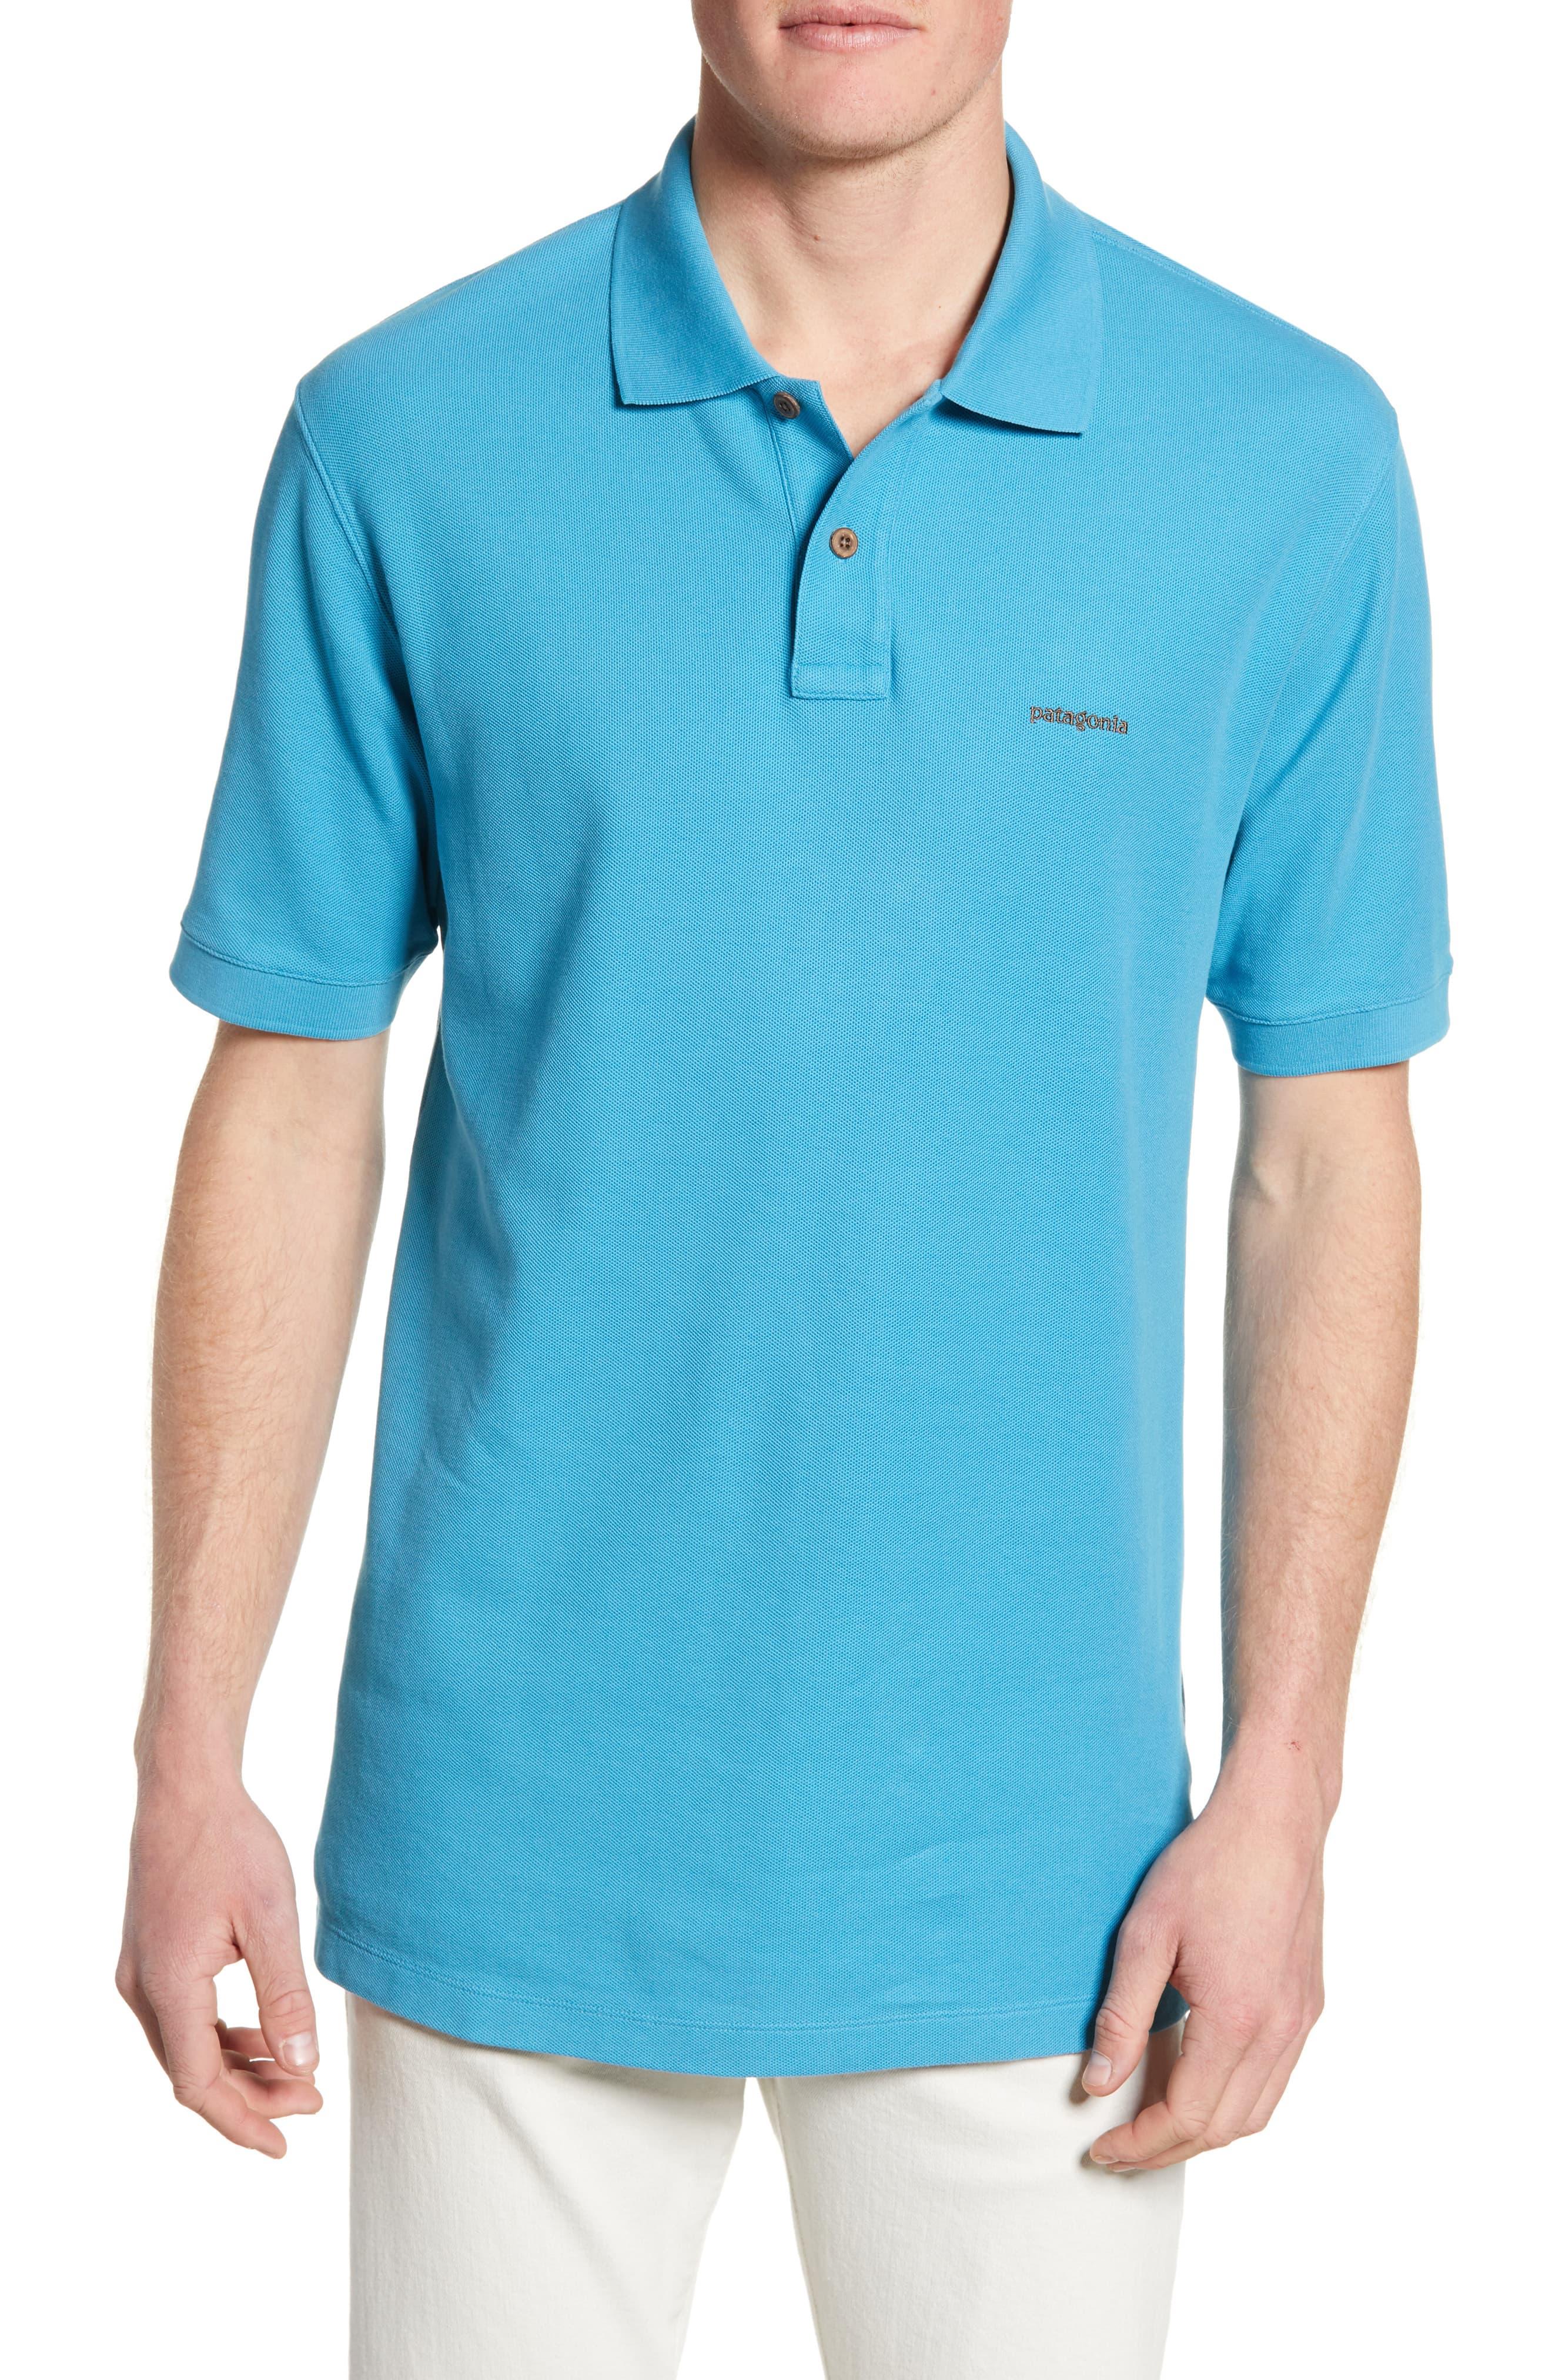 Patagonia Cotton Belwe Relaxed Fit Piqué Polo in Blue for Men - Lyst